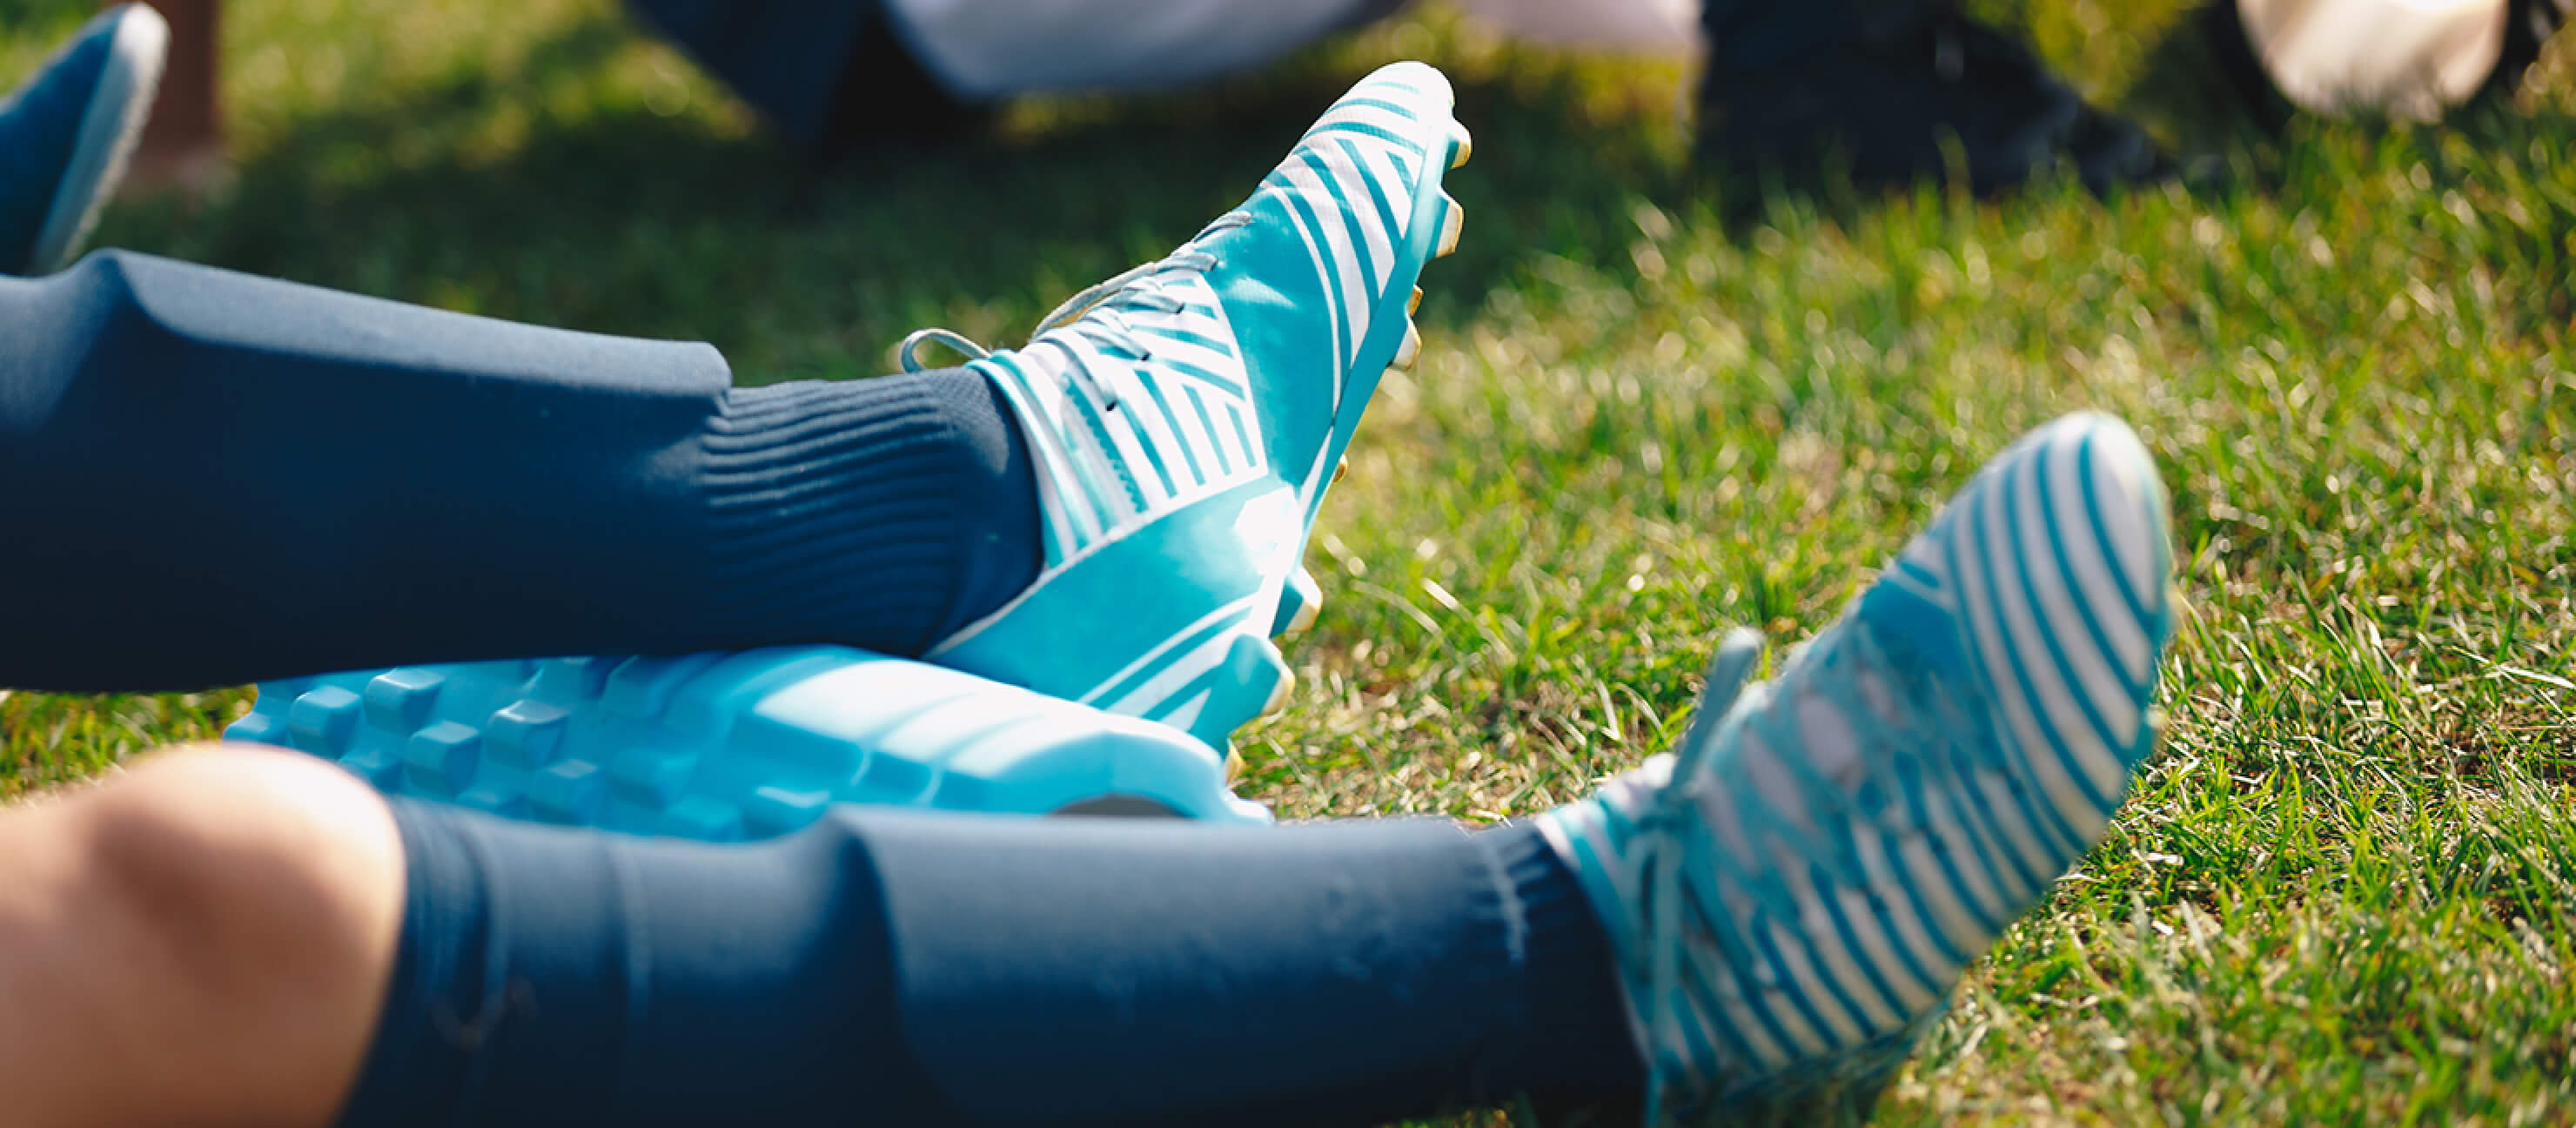 Players wearing blue and white soccer cleats recover after practice using a foam roller